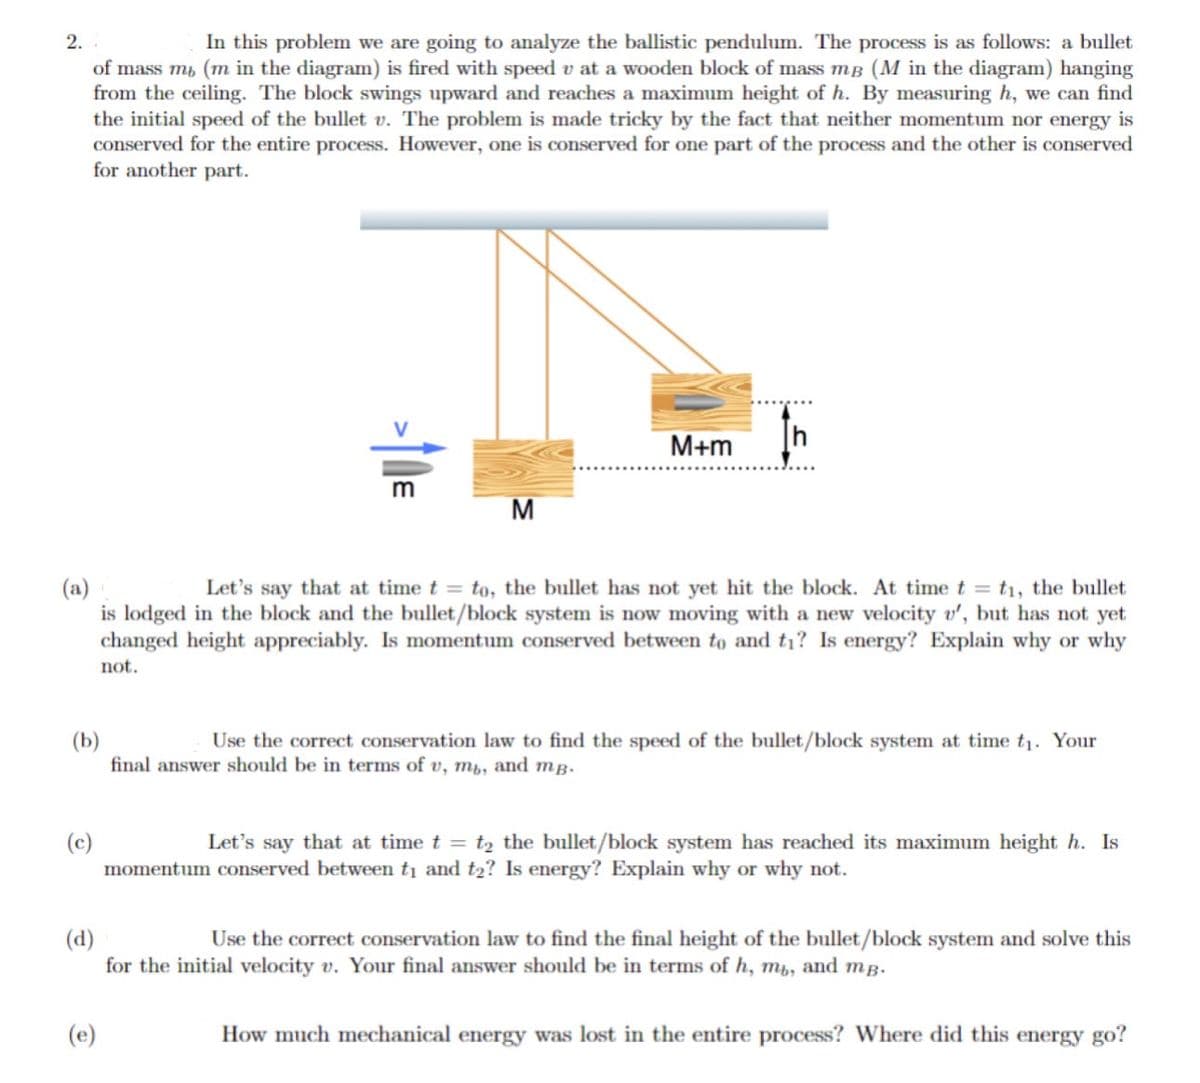 2.
In this problem we are going to analyze the ballistic pendulum. The process is as follows: a bullet
of mass me (m in the diagram) is fired with speed v at a wooden block of mass mB (M in the diagram) hanging
from the ceiling. The block swings upward and reaches a maximum height of h. By measuring h, we can find
the initial speed of the bullet v. The problem is made tricky by the fact that neither momentum nor energy is
conserved for the entire process. However, one is conserved for one part of the process and the other is conserved
for another part.
>↑DE
(c)
M
(a)
Let's say that at time t = to, the bullet has not yet hit the block. At time t = t₁, the bullet
is lodged in the block and the bullet/block system is now moving with a new velocity v', but has not yet
changed height appreciably. Is momentum conserved between to and ti? Is energy? Explain why or why
not.
M+m
(b)
Use the correct conservation law to find the speed of the bullet/block system at time t₁. Your
final answer should be in terms of v, mu, and mp.
(e)
Let's say that at time t = t₂ the bullet/block system has reached its maximum height h. Is
momentum conserved between t₁ and t₂? Is energy? Explain why or why not.
(d)
Use the correct conservation law to find the final height of the bullet/block system and solve this
for the initial velocity v. Your final answer should be in terms of h, mb, and mp.
How much mechanical energy was lost in the entire process? Where did this energy go?